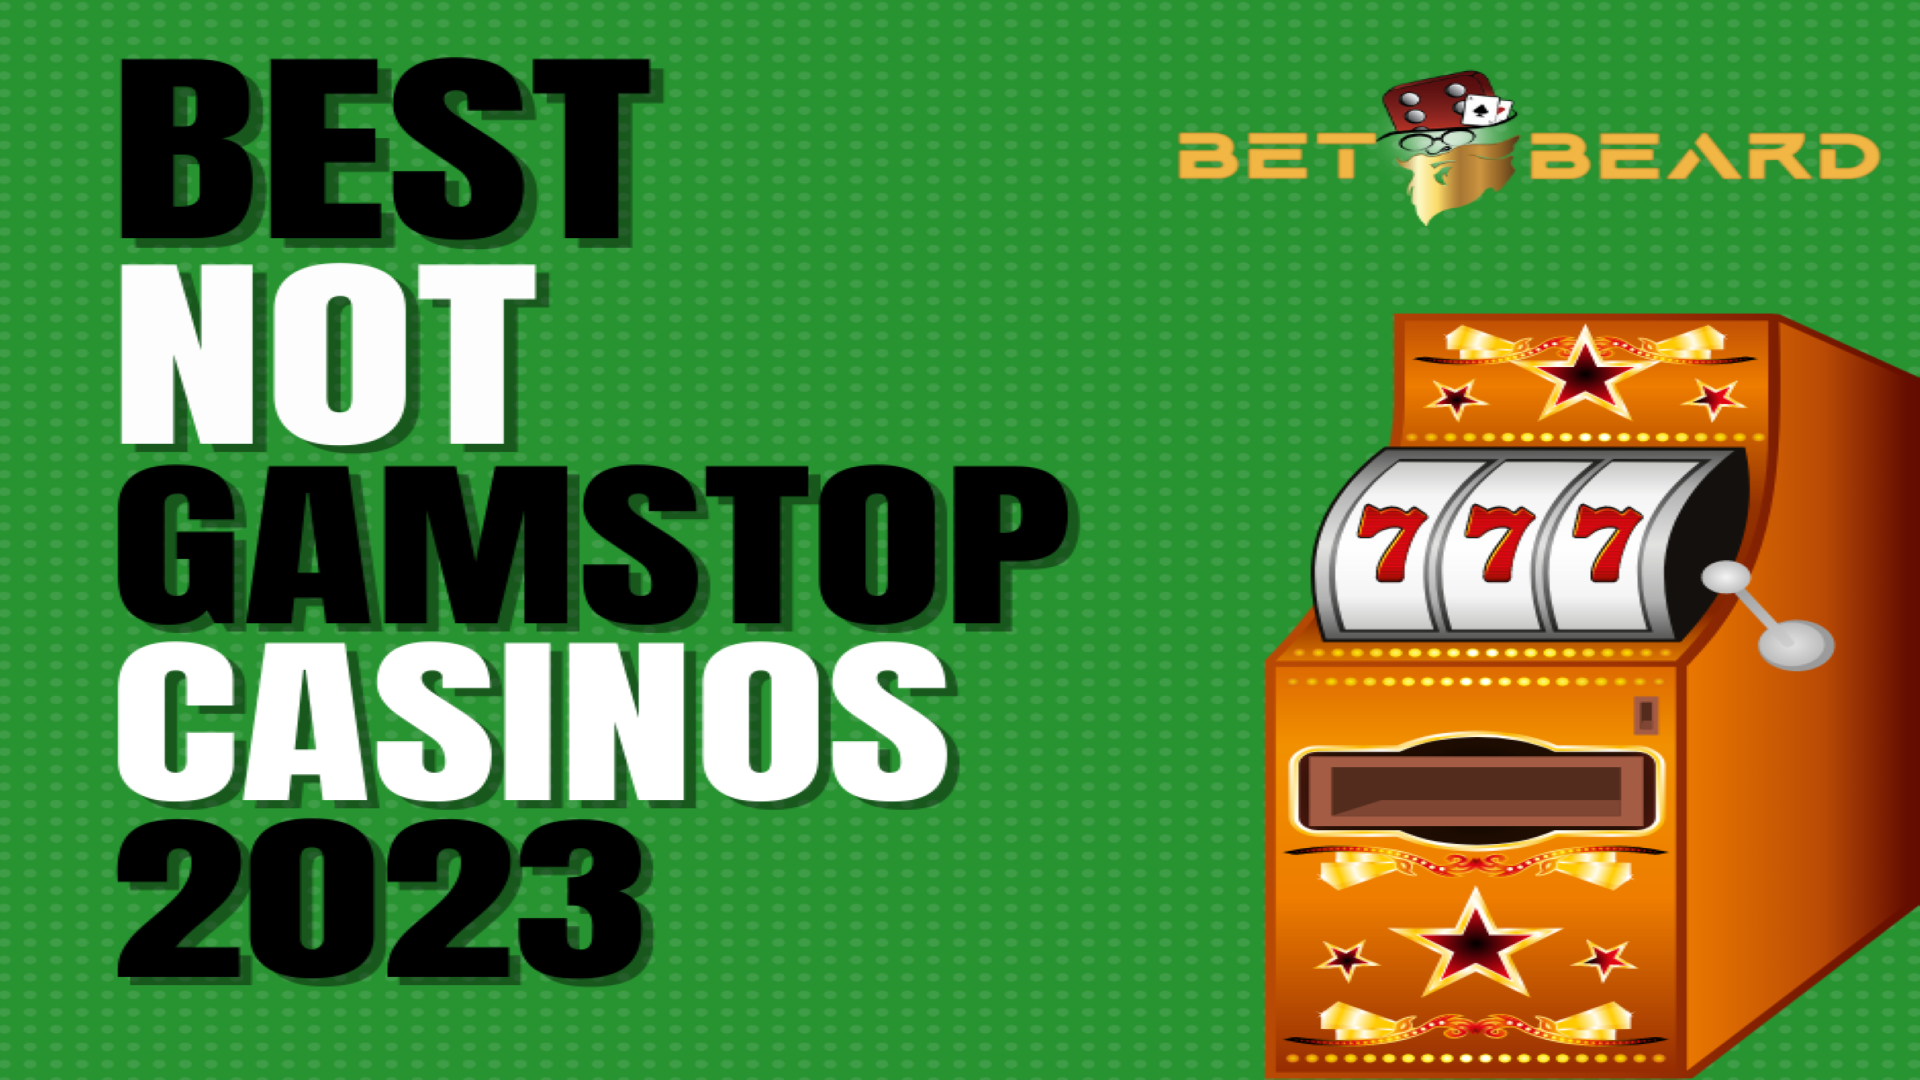 5 gamstop gambling Issues And How To Solve Them